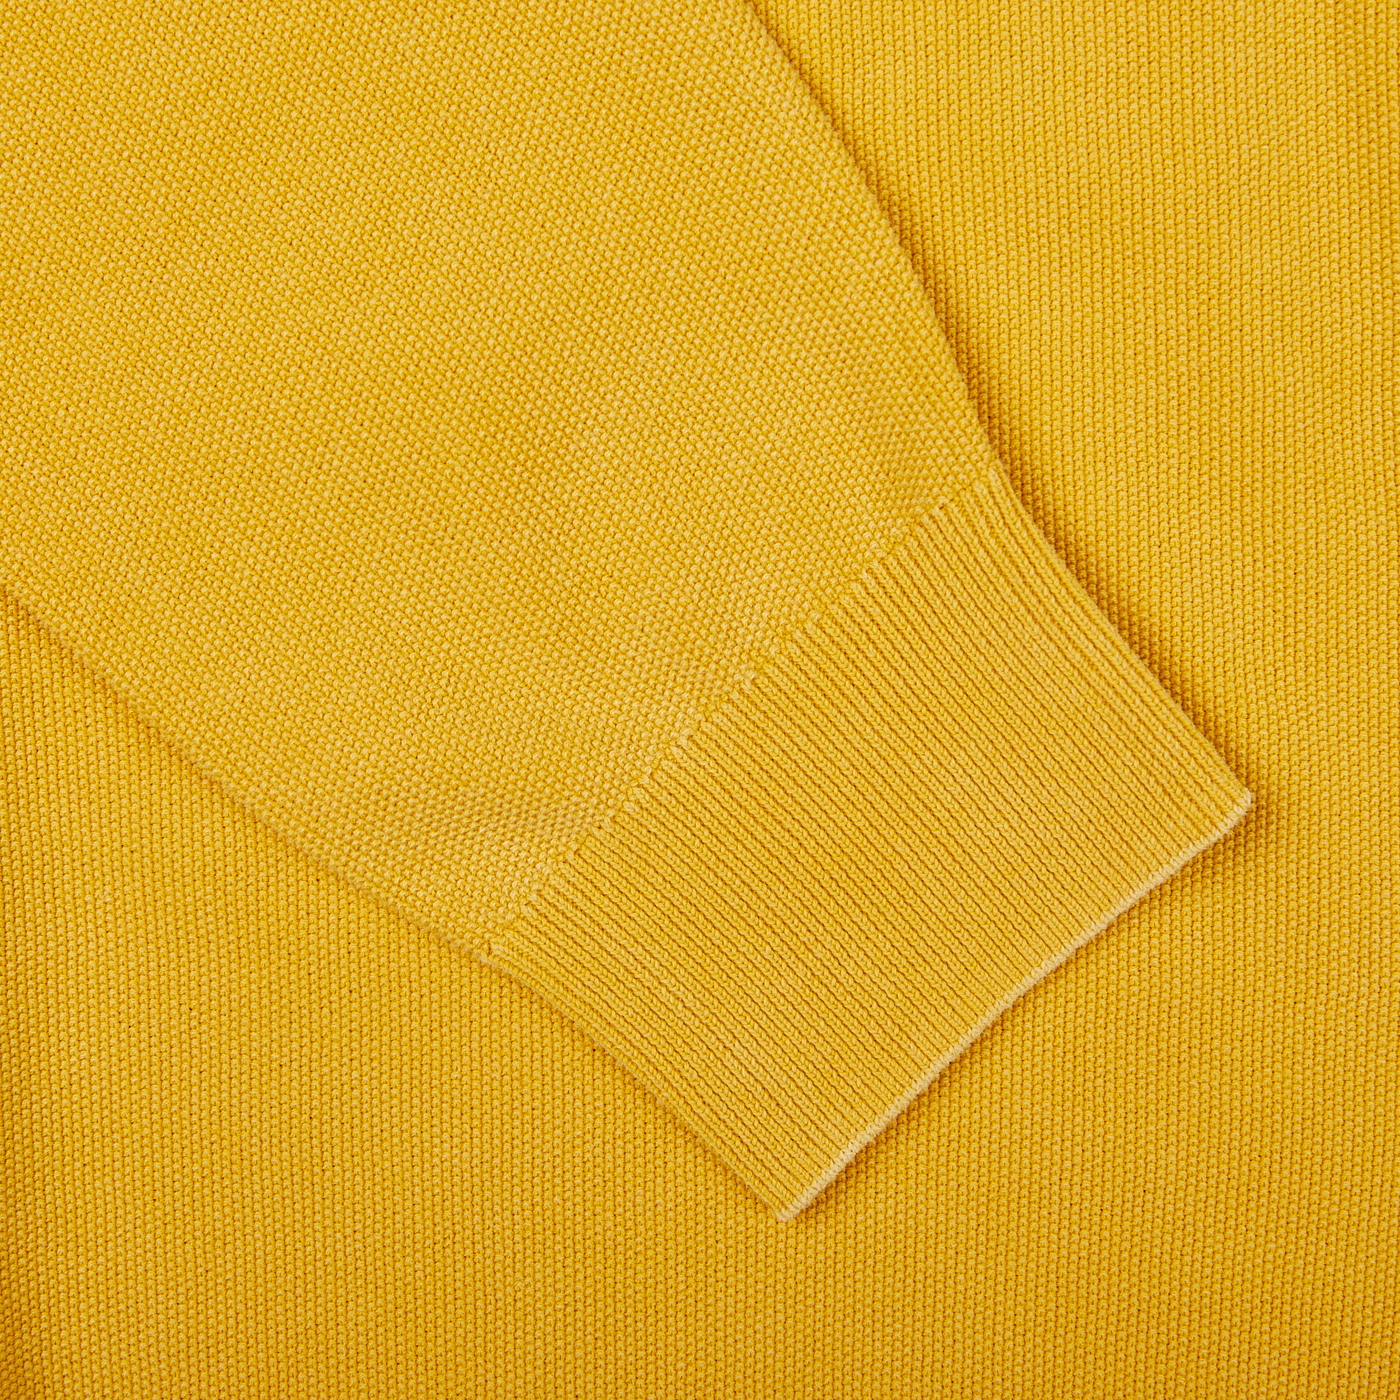 A close-up image of a Bright Yellow Cotton Piquet Crew Neck Sweater by Aspesi.